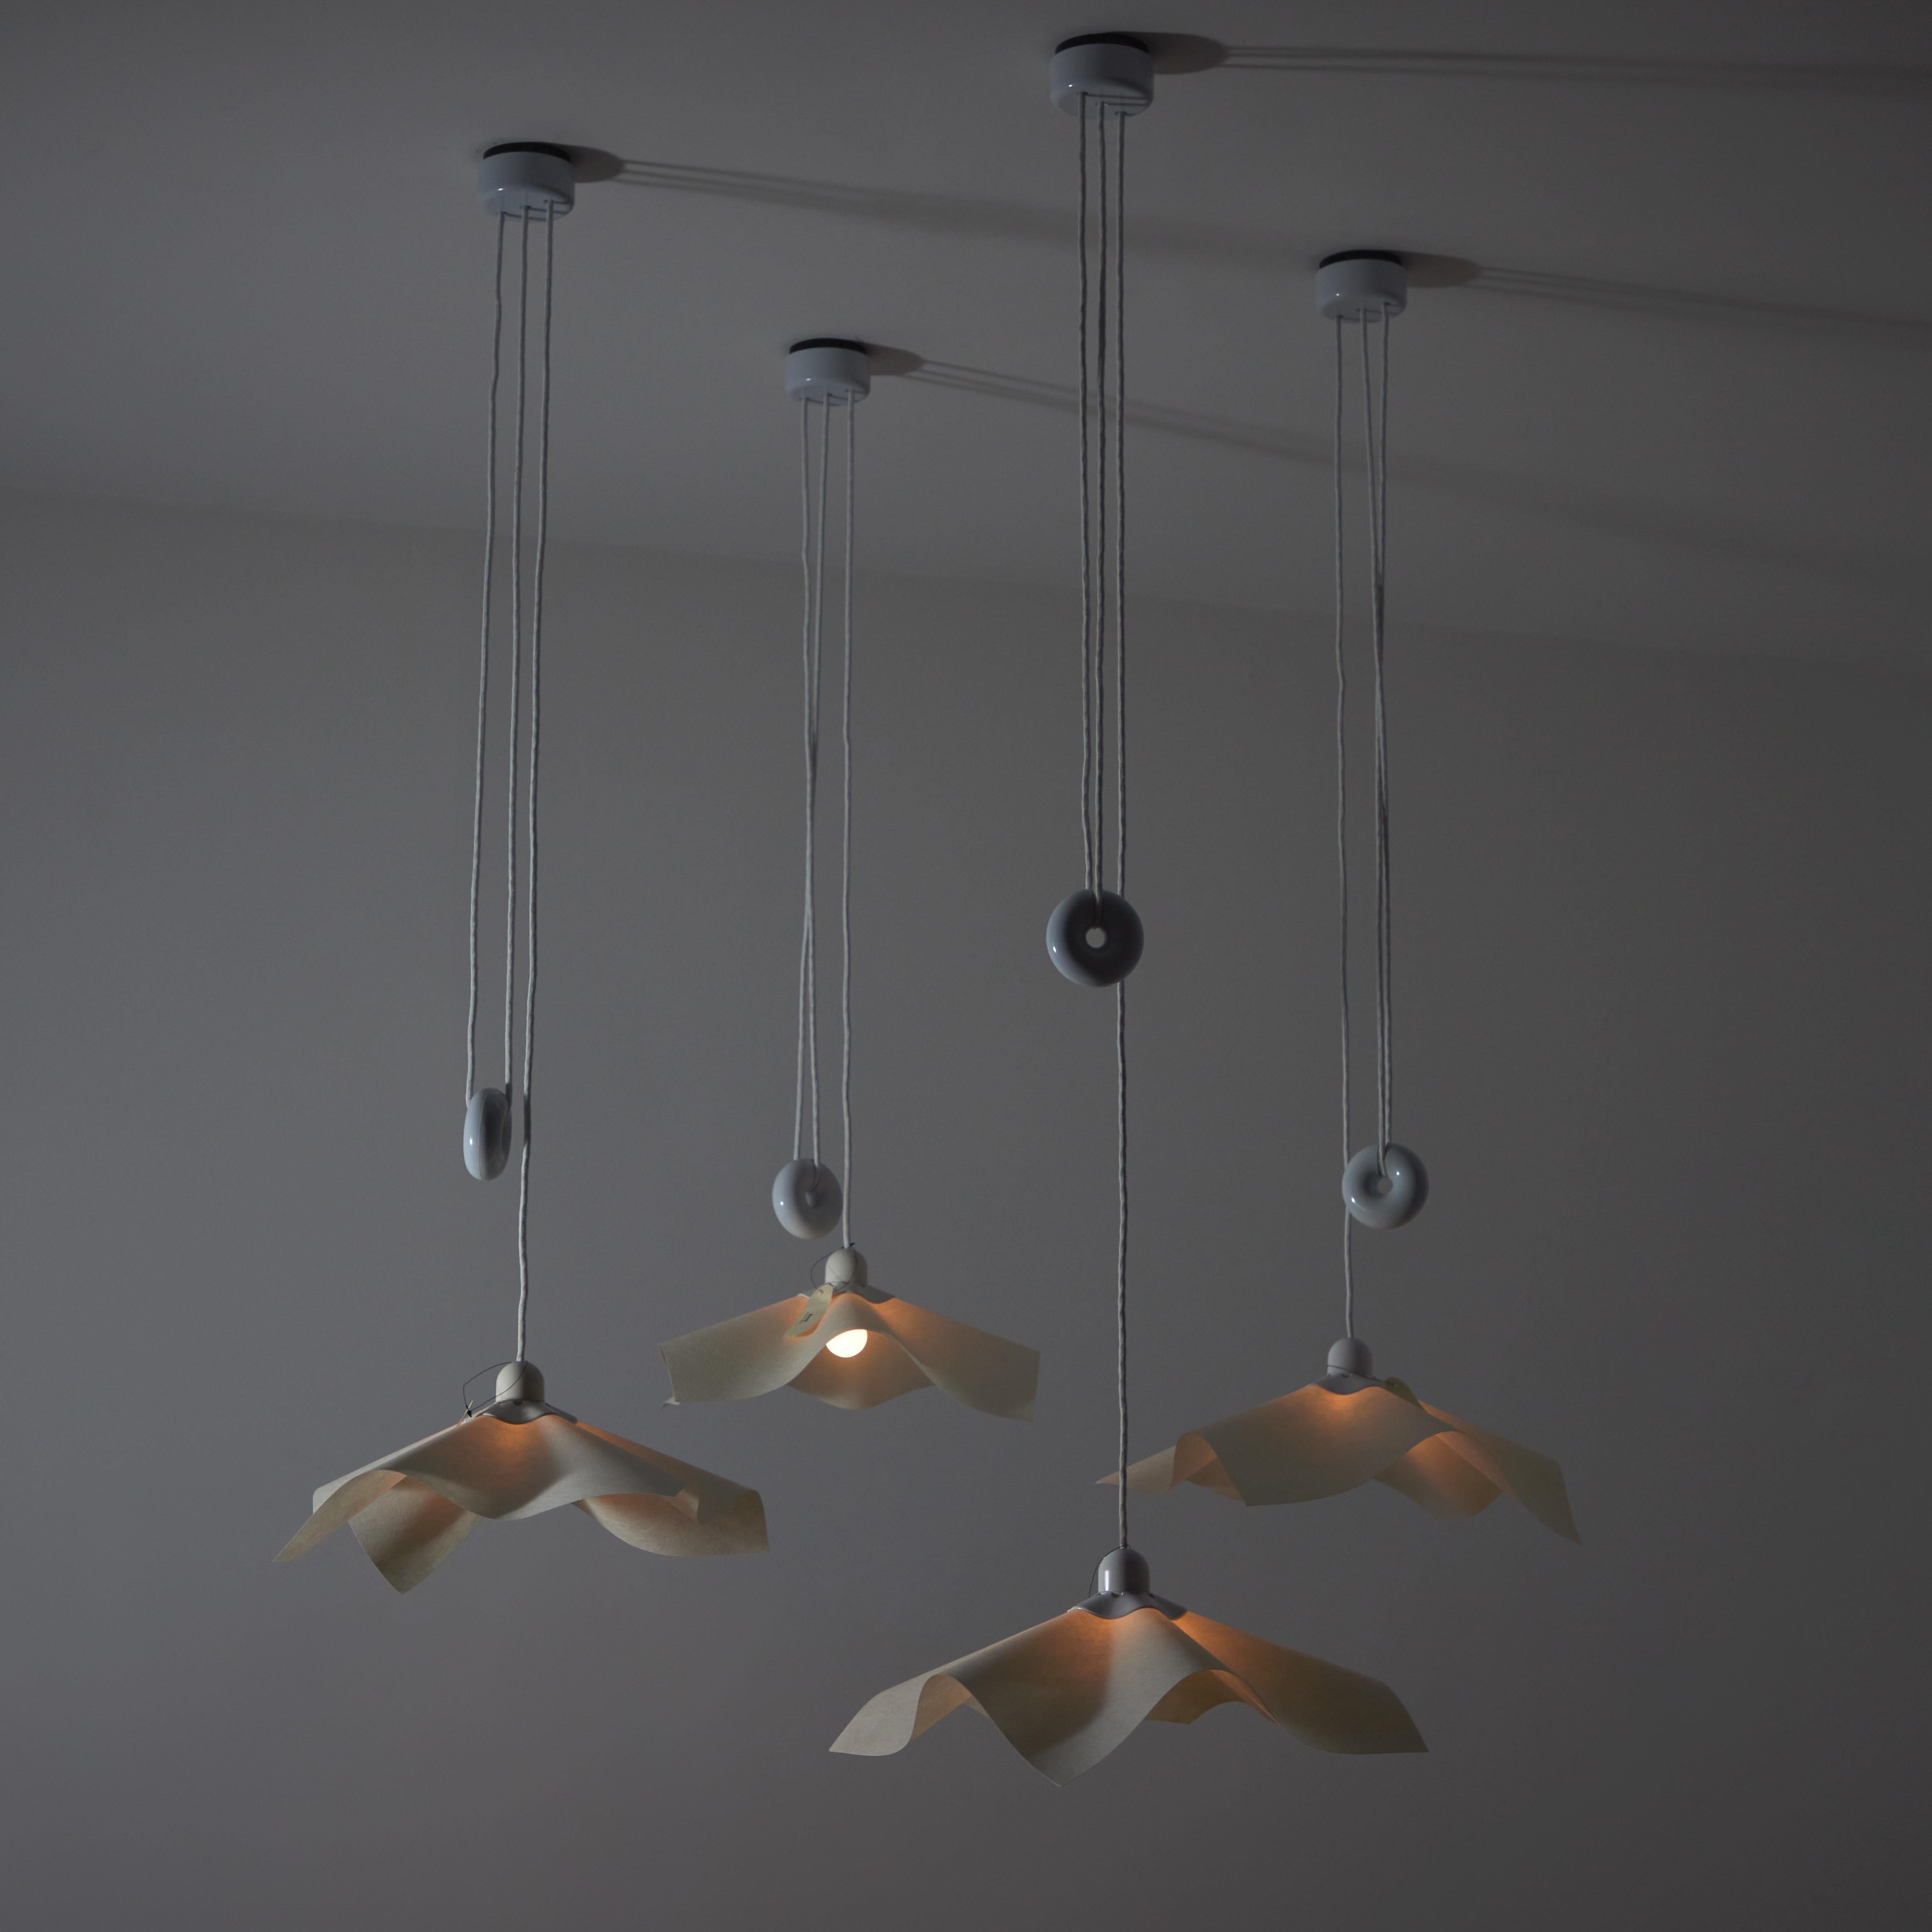 'Area 50' Pendants by Mario Bellini for Artemide. Designed and manufactured in Italy, 1976. Iconic model from Bellini consist of a counter donut weight allowing for variable adjustments to the height. The shade comprises of molded parchment paper.